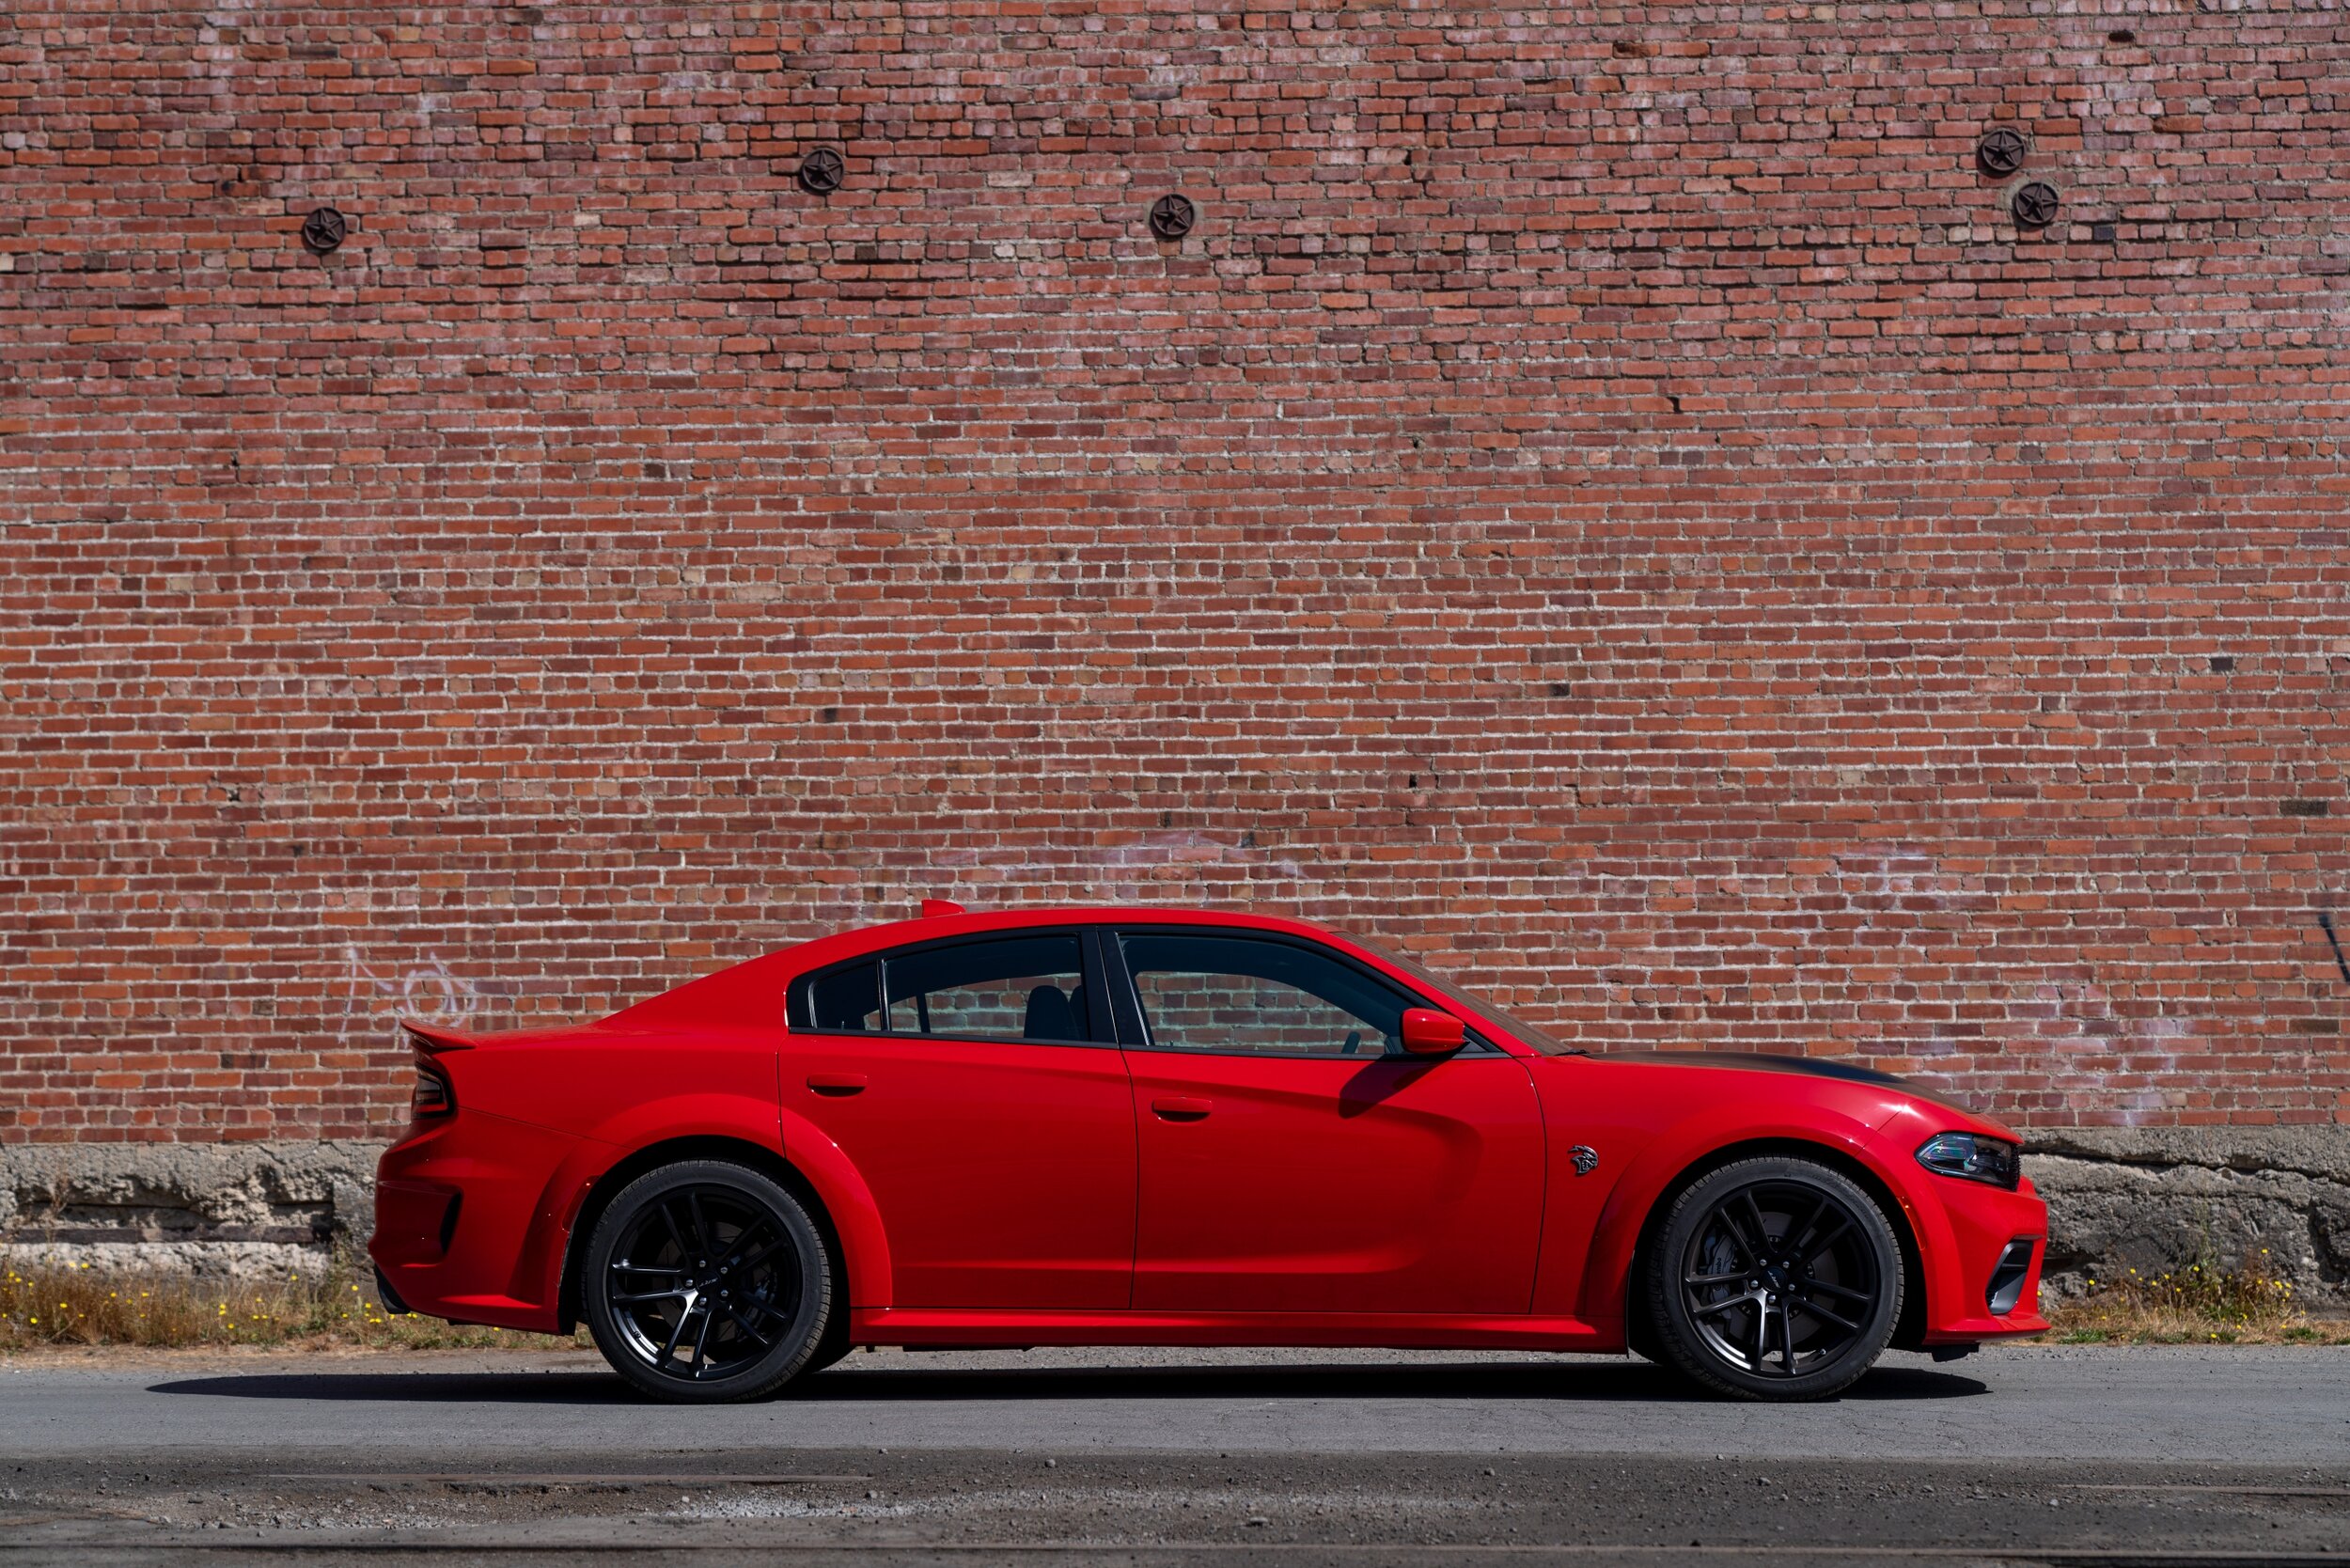 The 2020 Dodge Charger SRT Hellcat Widebody is powered by the pr